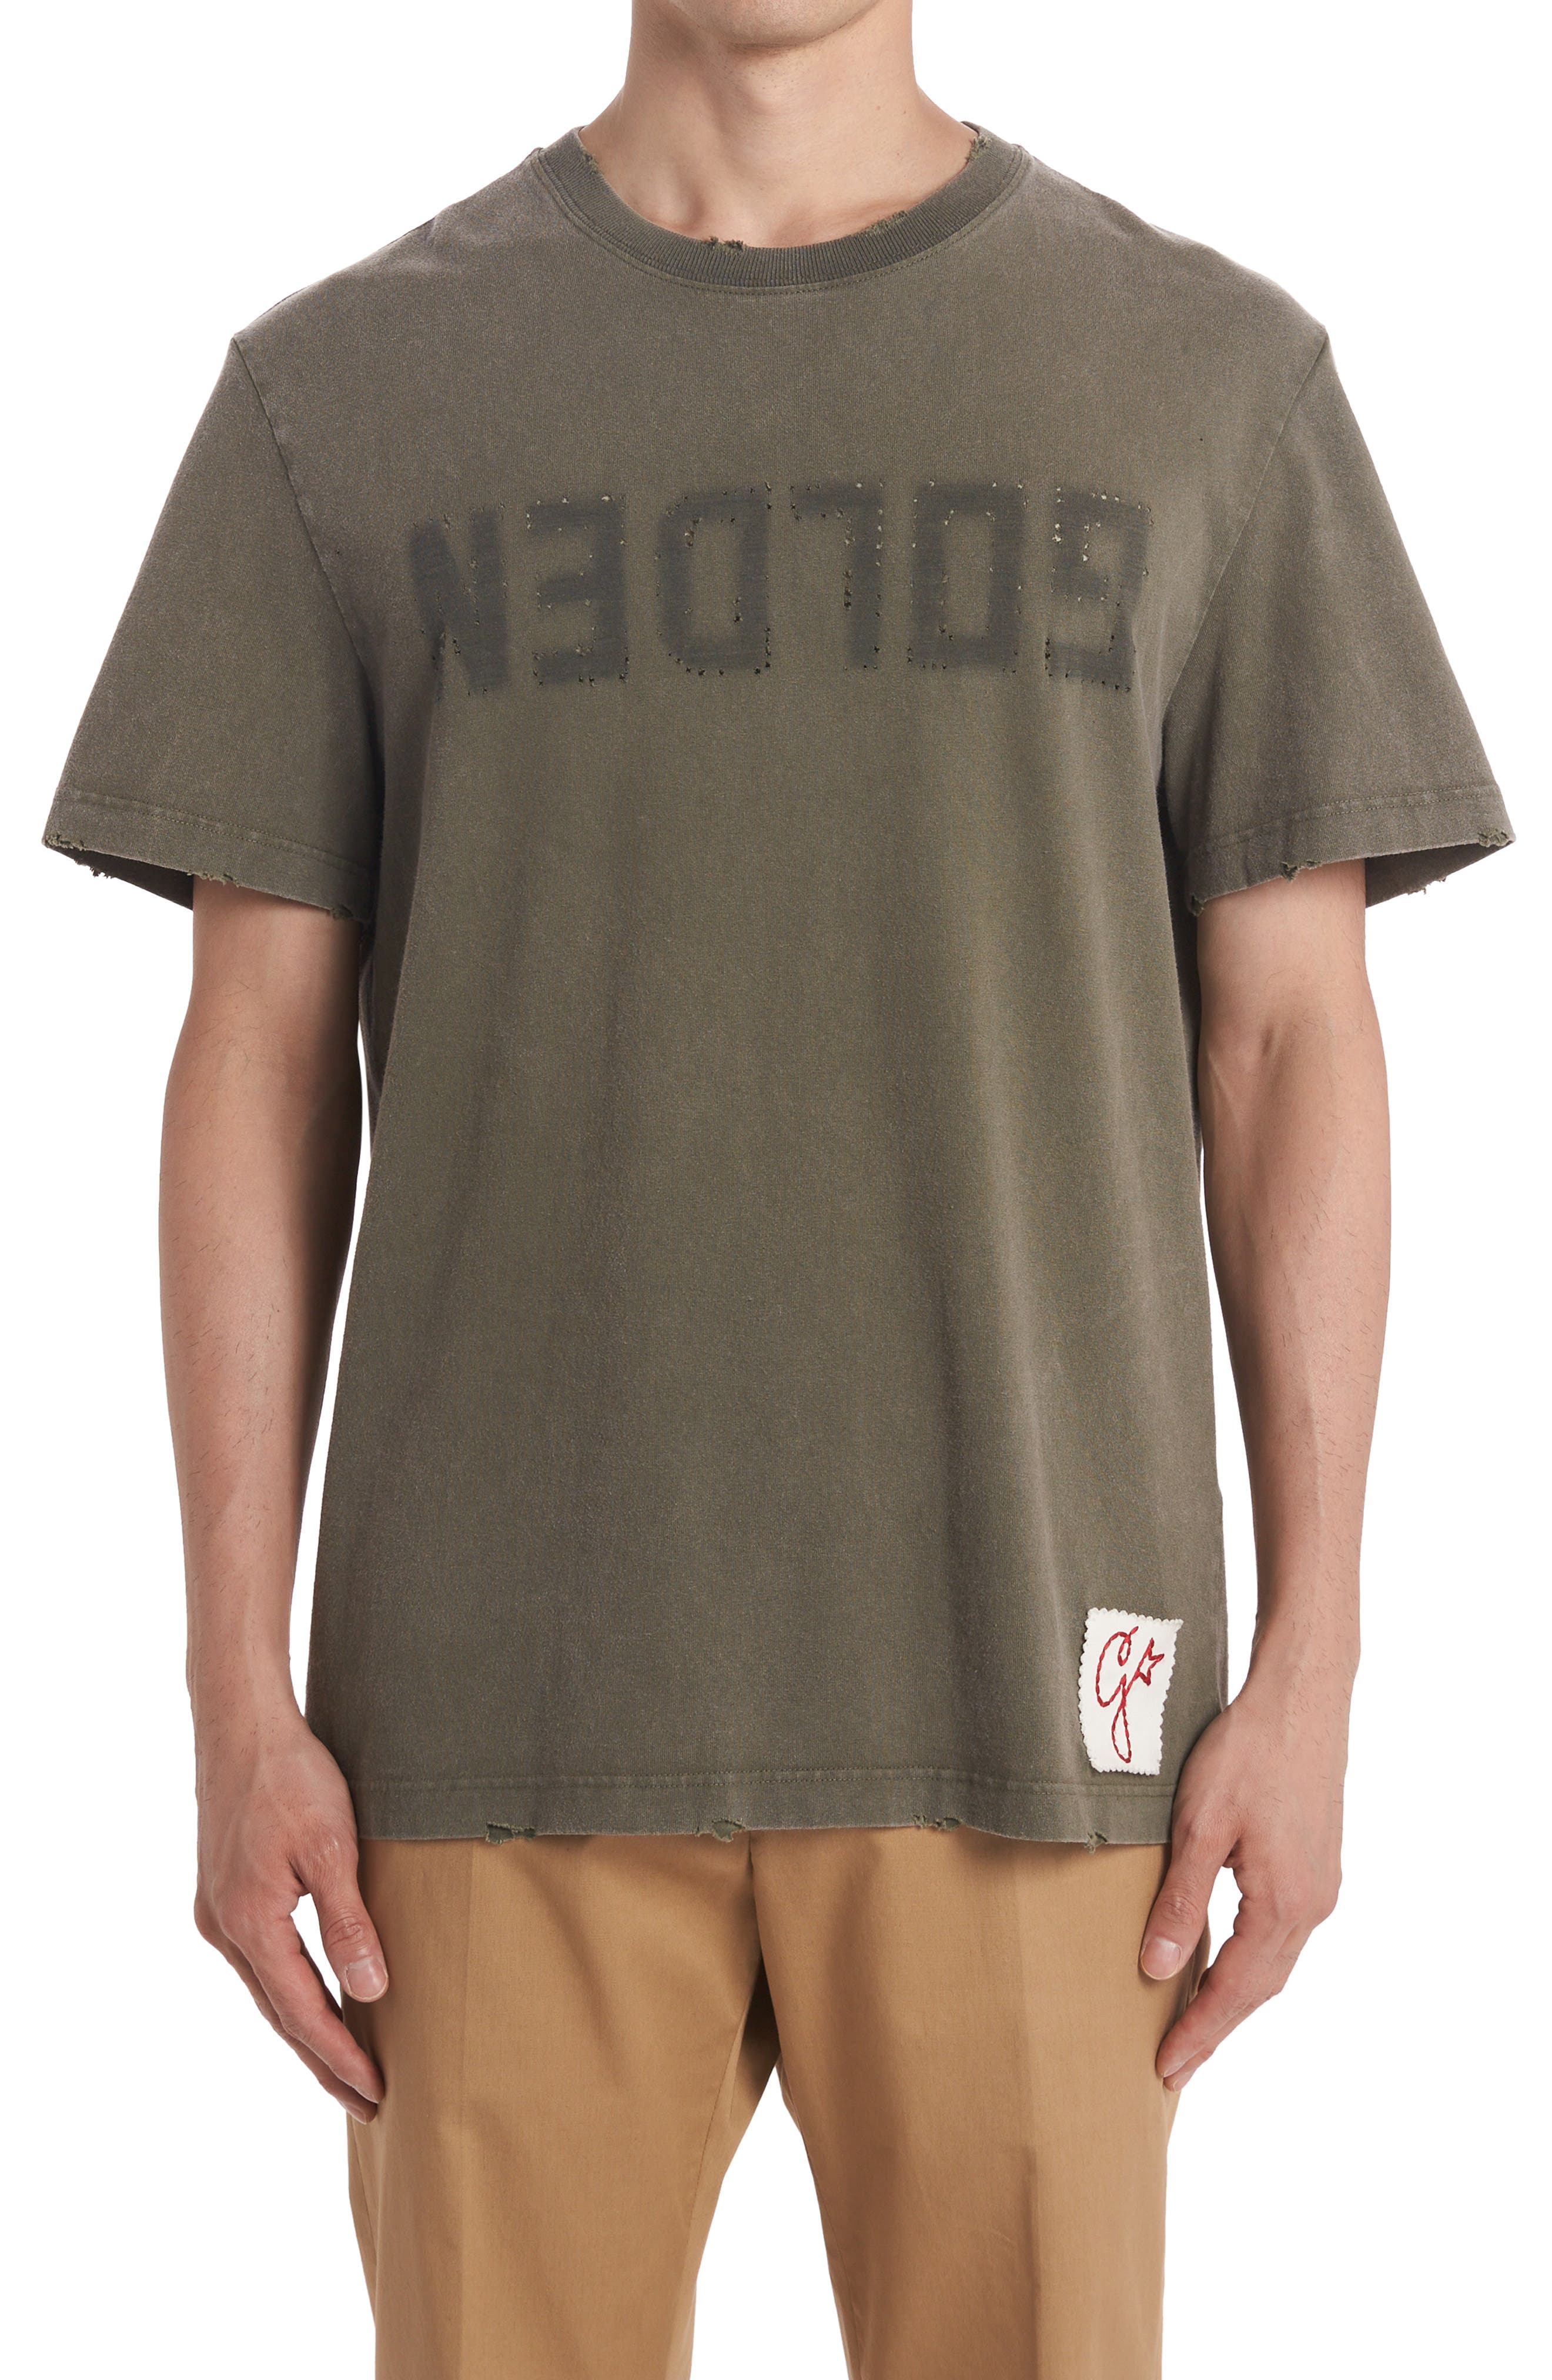 Golden Goose Distressed Cotton Graphic Tee in Dusty Olive at Nordstrom, Size Small